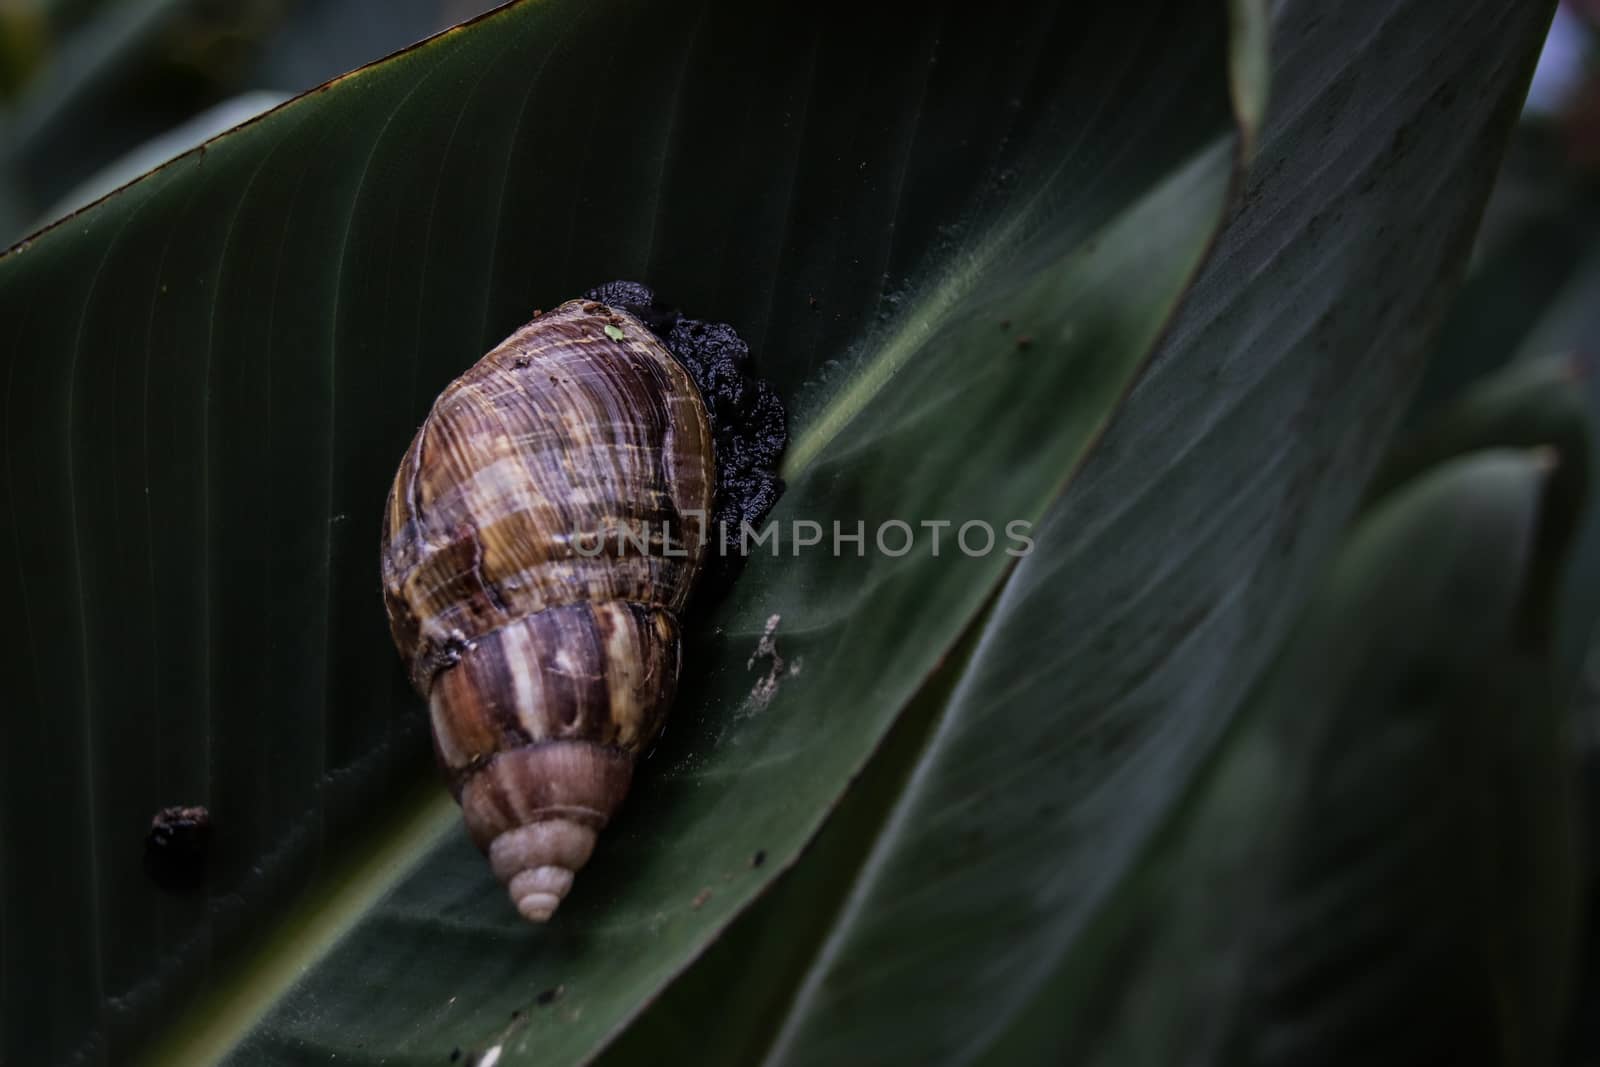 Achatina fulica or Giant african land snail by Sonnet15